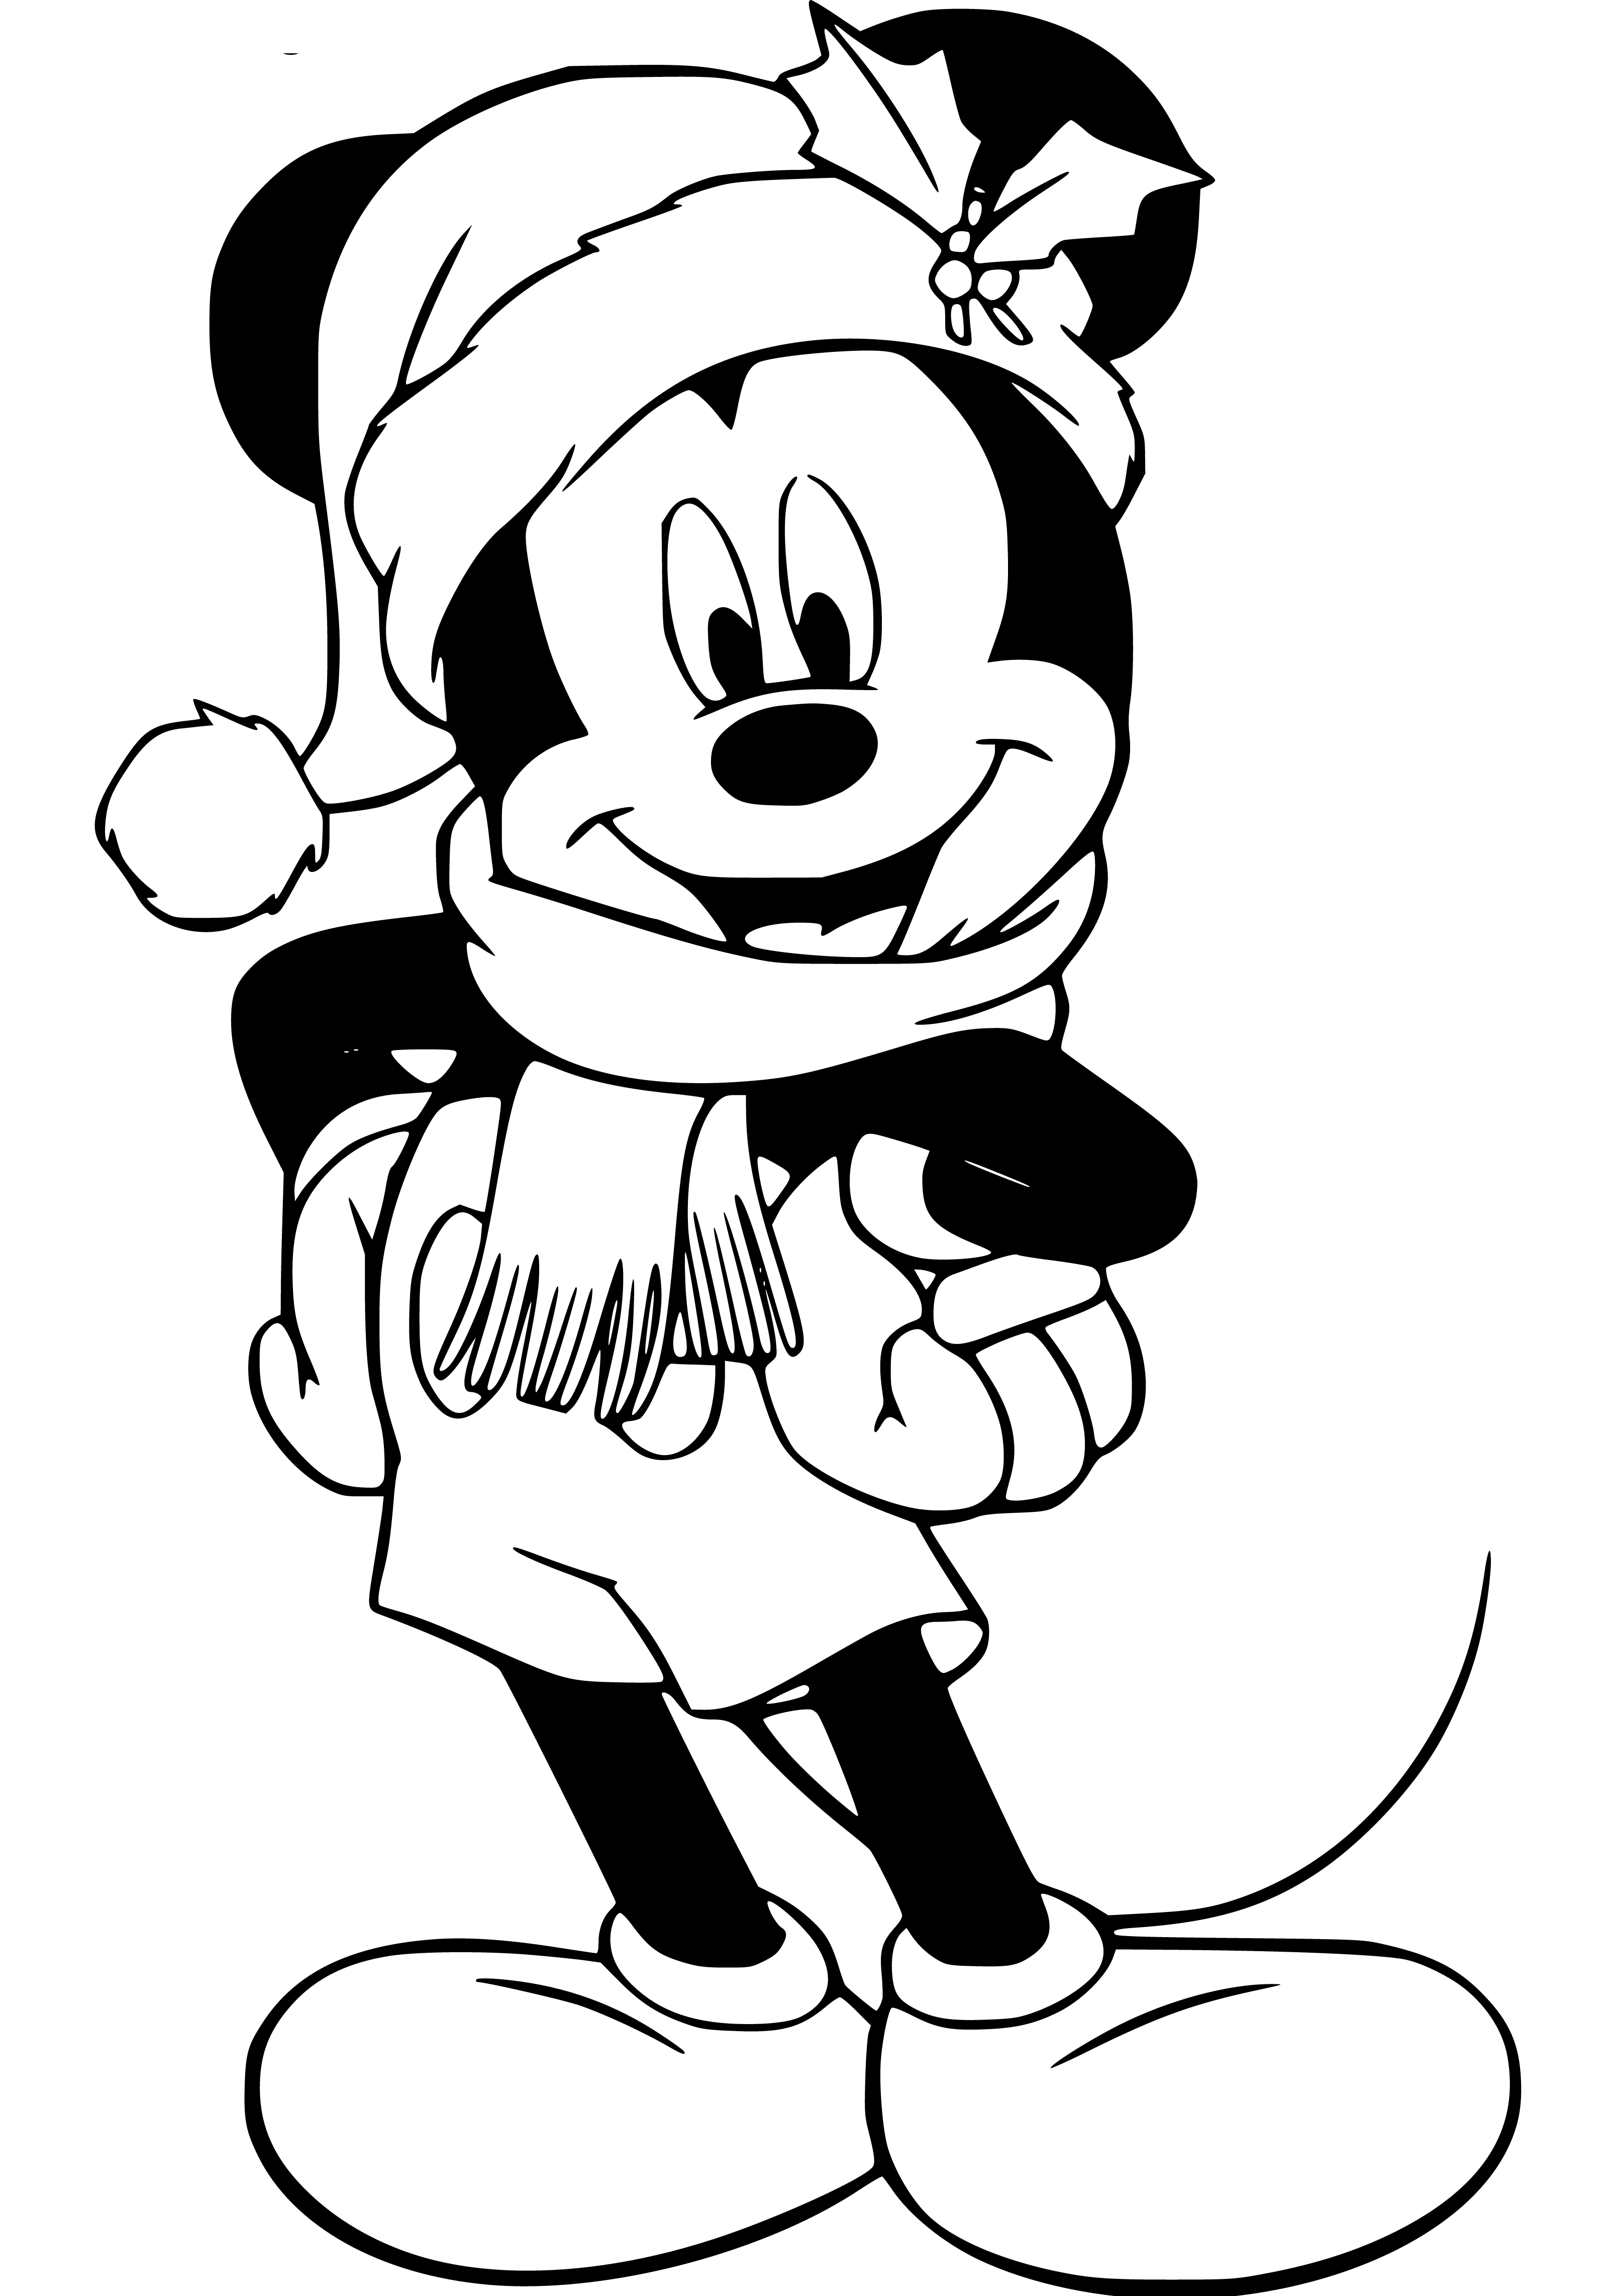 Mickey in Winter Coloring Page 4 kids - SheetalColor.com